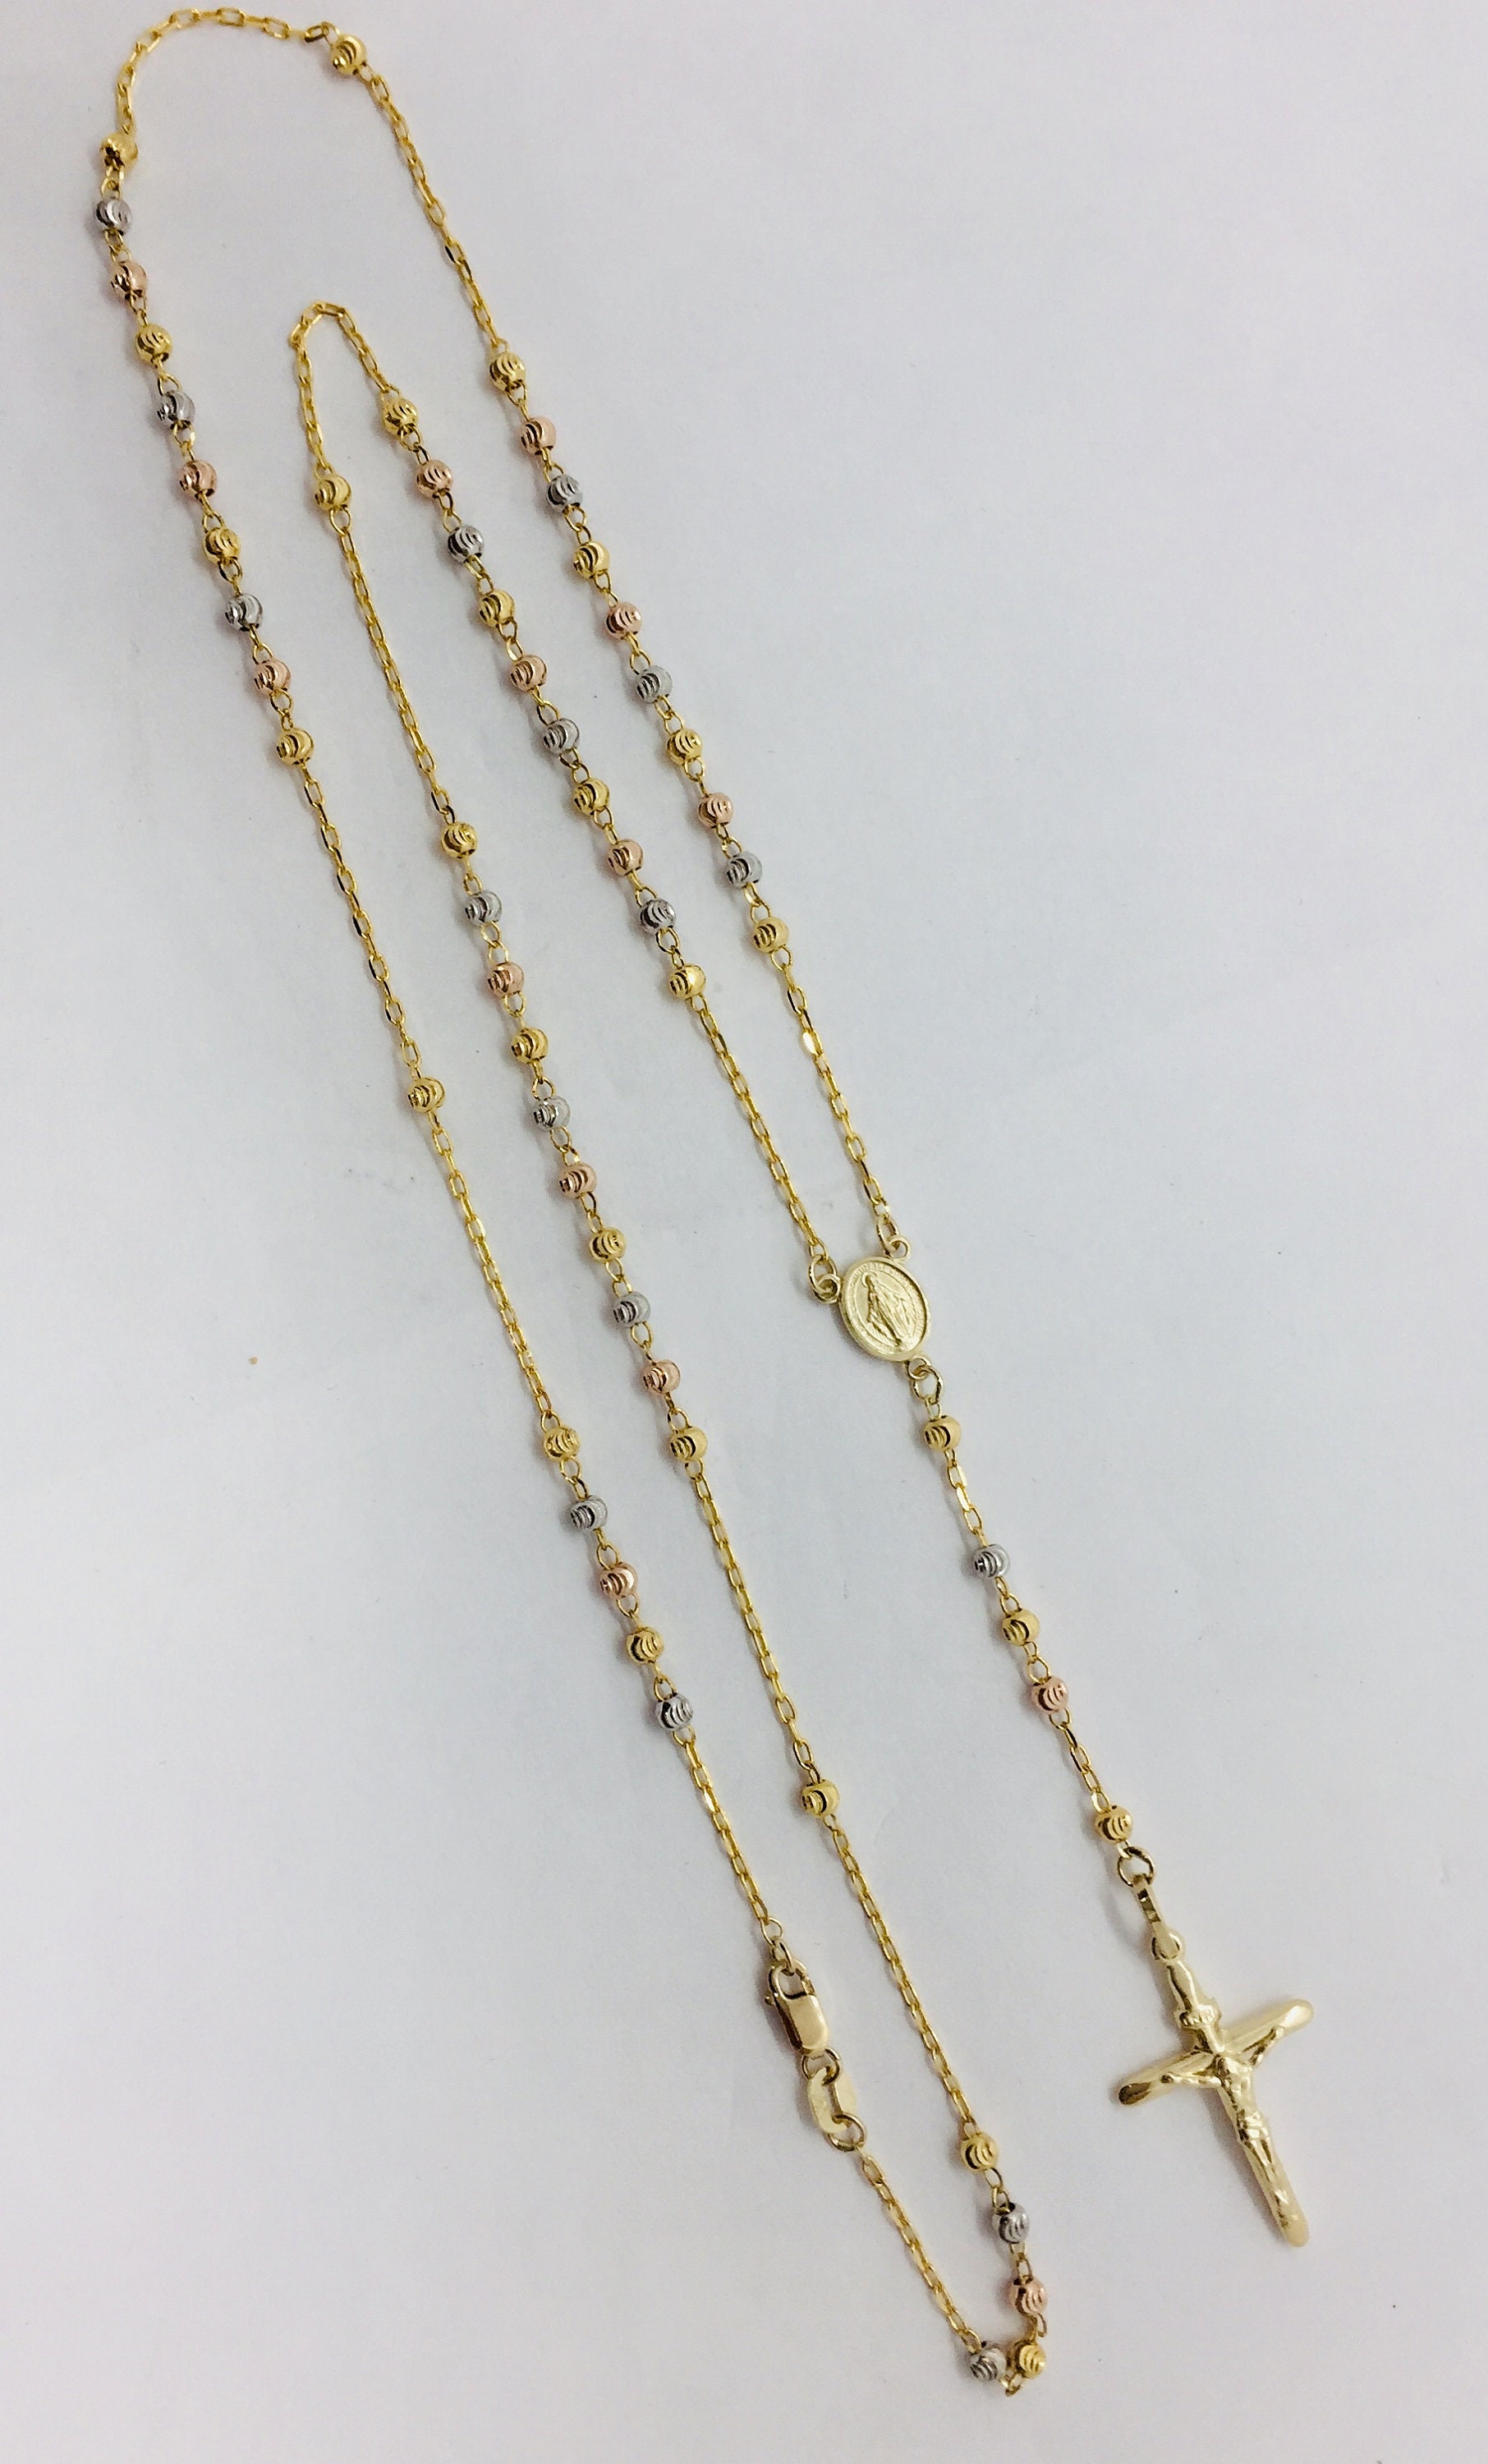 14K Solid Yellow Gold Rosary Necklace Crucifix Men's/women's 3mm